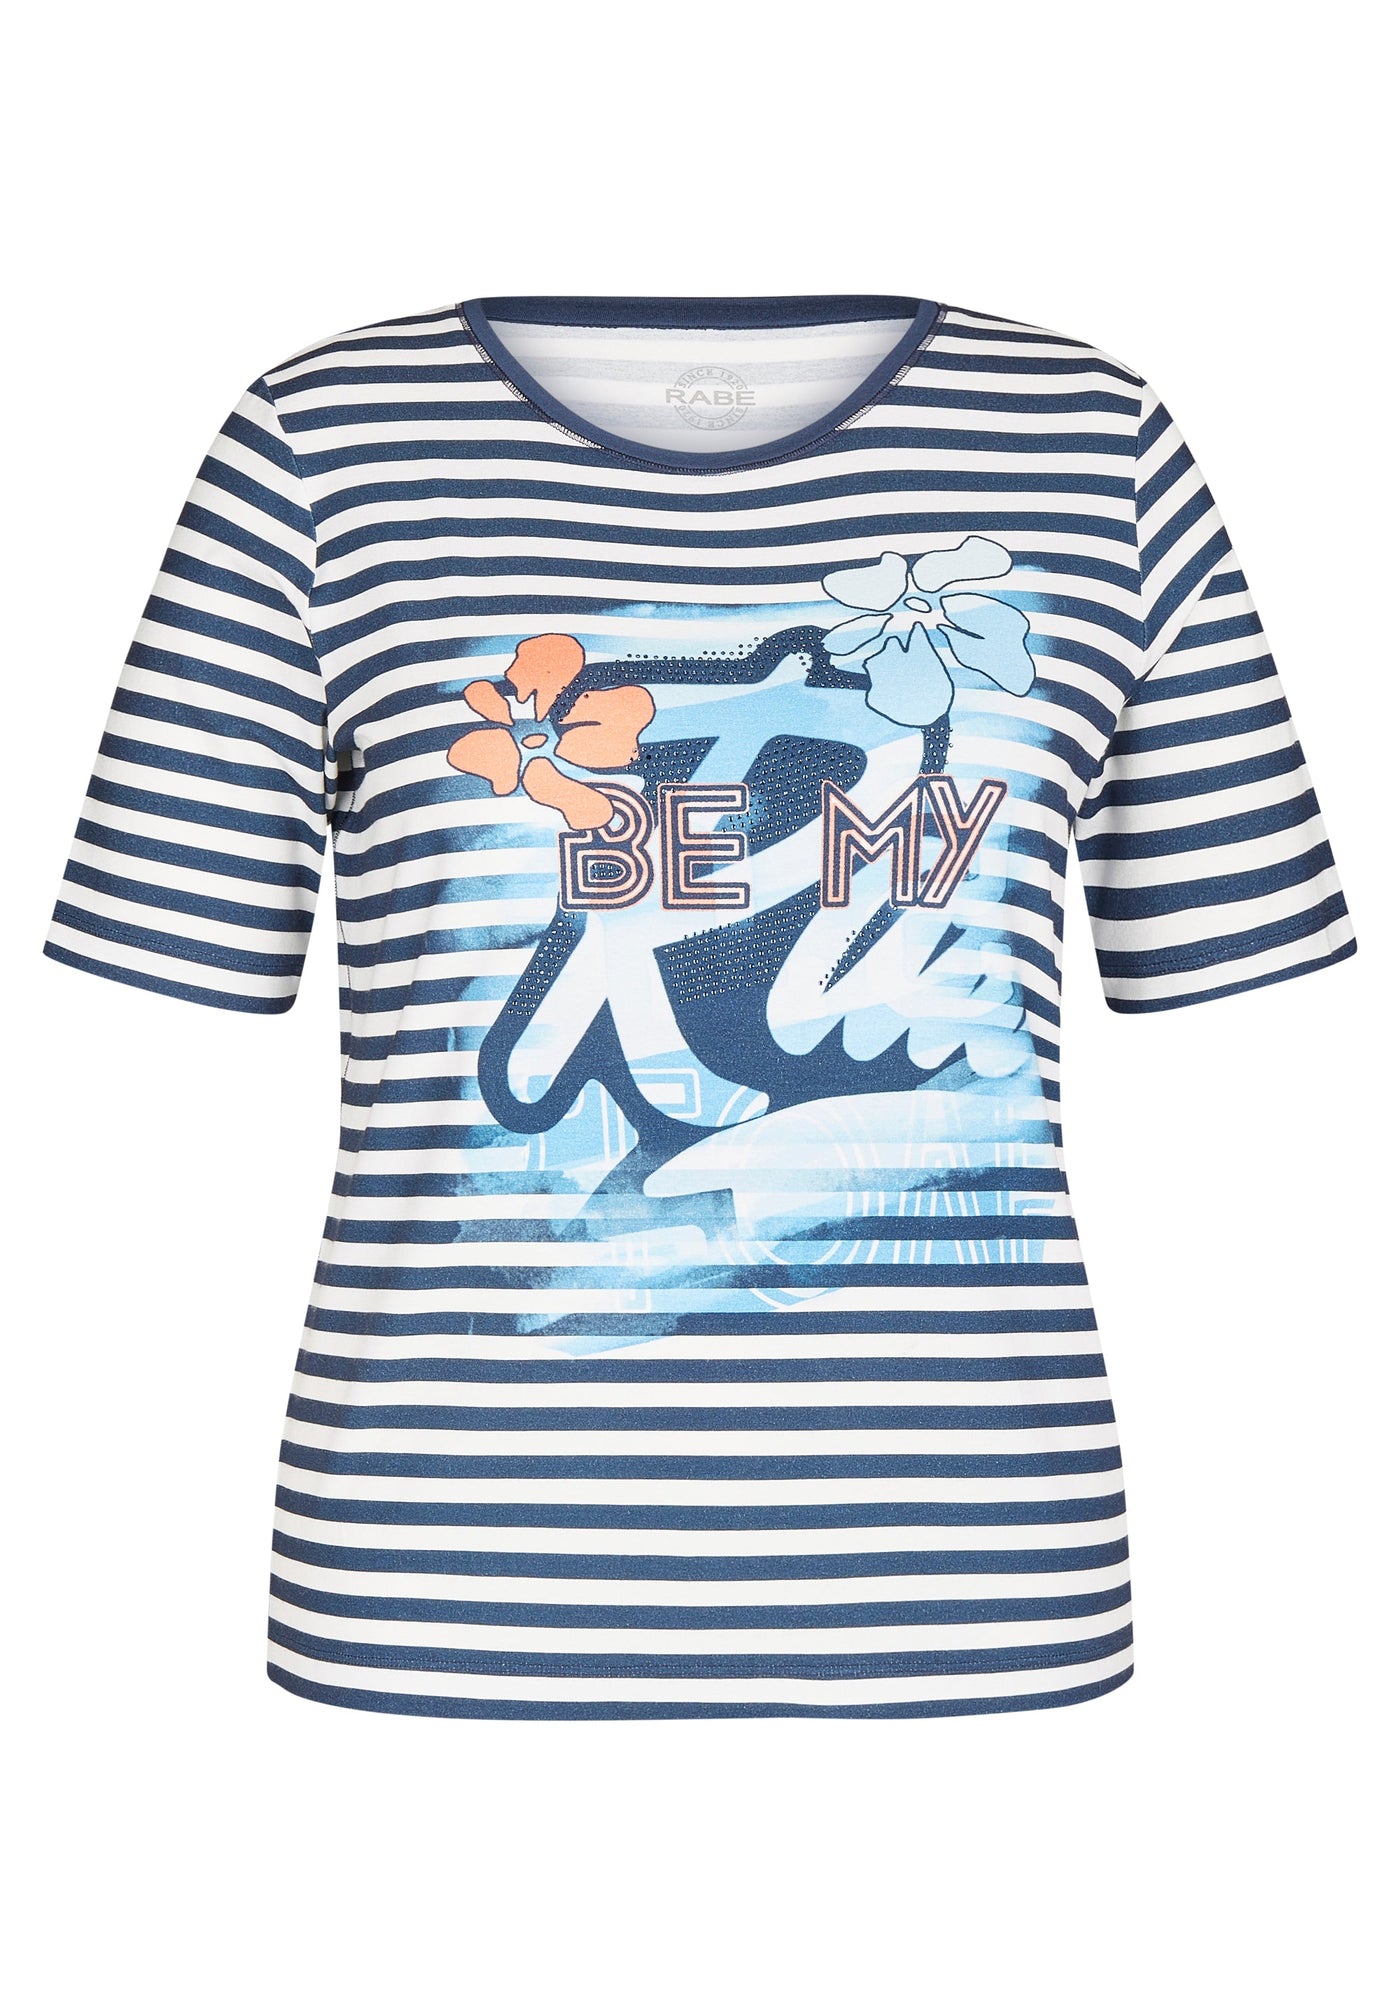 Navy & White Striped T-Shirt with Graphic Print and Diamante Detail